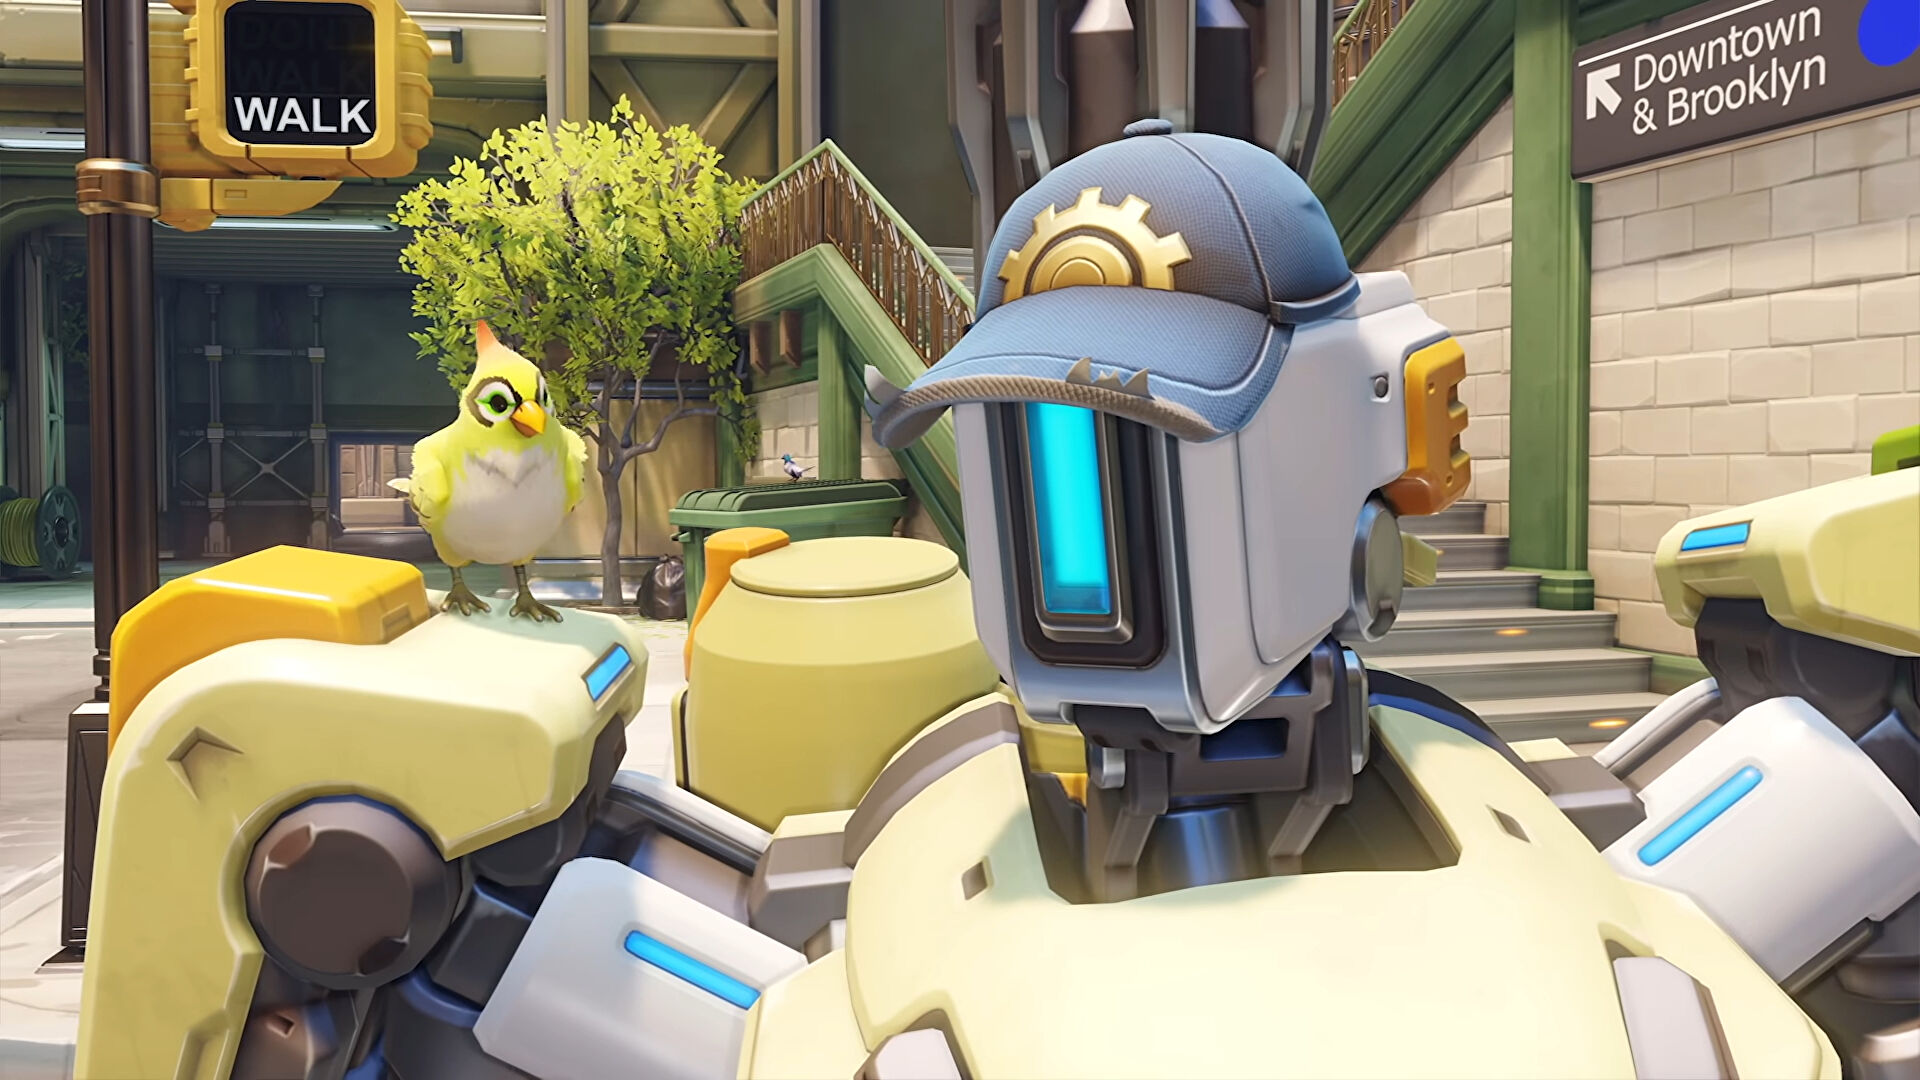 Overwatch 2’s launch issues being made worse by DDoS attack